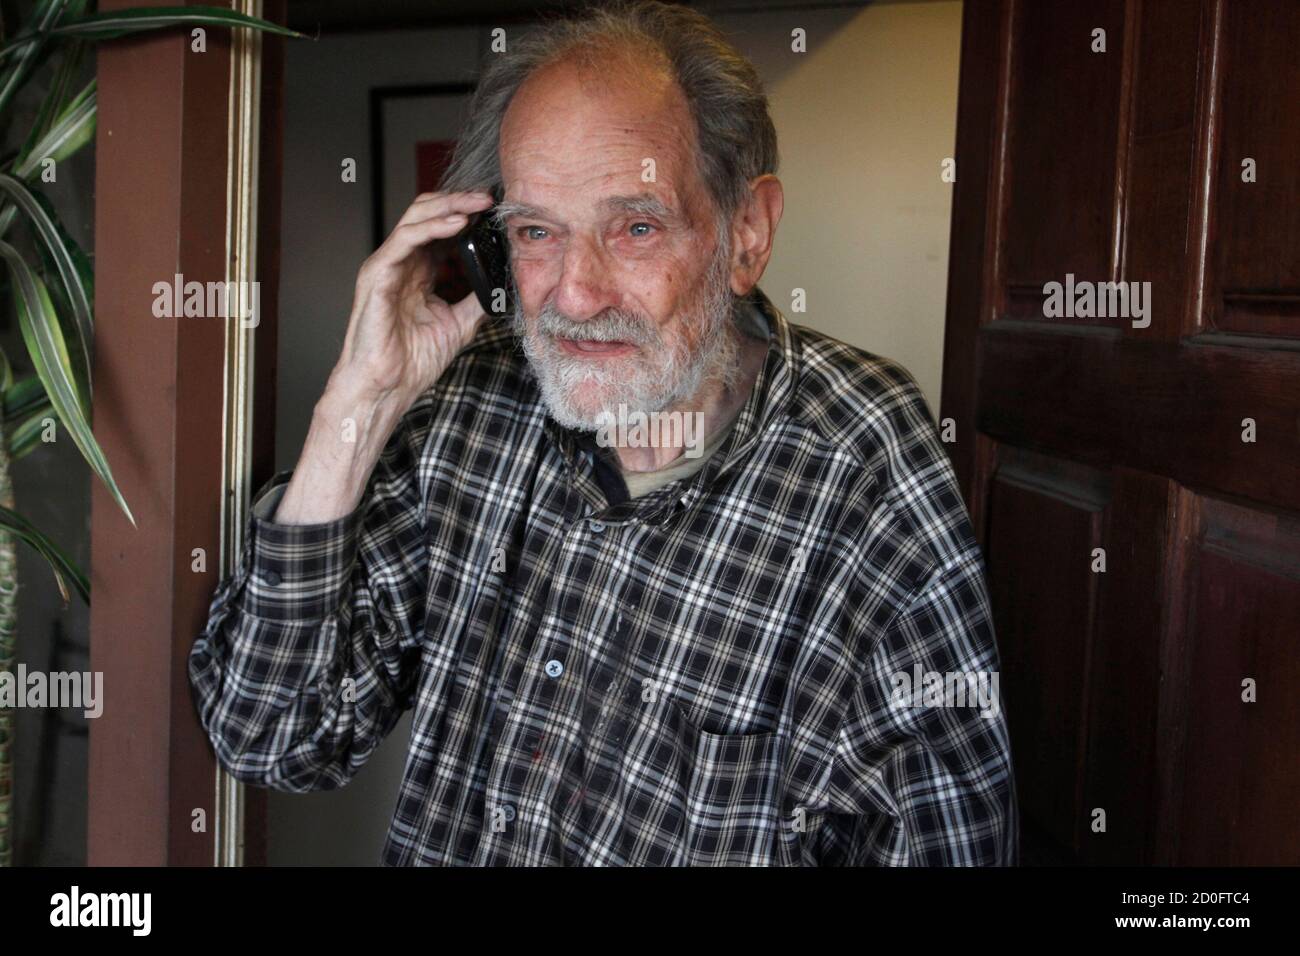 U.S Economist Lloyd Shapley speaks on the phone minutes after being  notified that he won the 2012 economics Noble prize in Los Angeles,  California, October 15, 2012. Life-saving kidney exchange programmes are